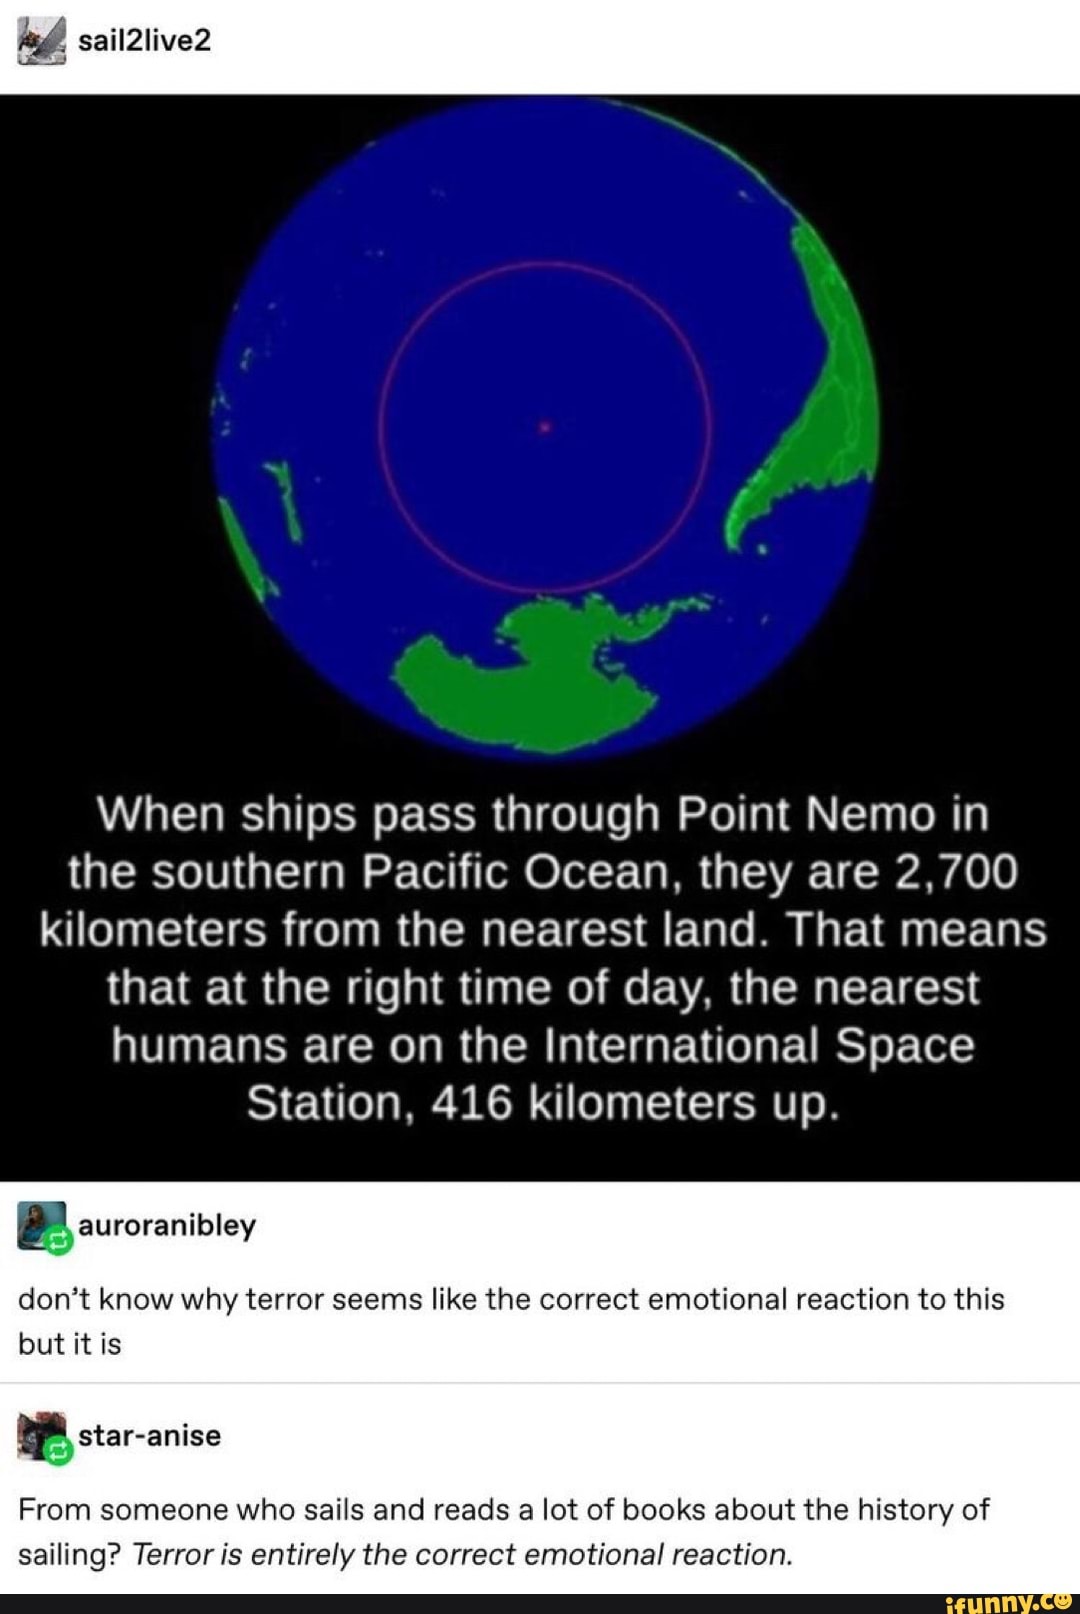 r lyeh point nemo - sail2live2 When ships pass through Point Nemo in the southern Pacific Ocean, they are 2,700 kilometers from the nearest land. That means that at the right time of day, the nearest humans are on the International Space Station, 416 kilo